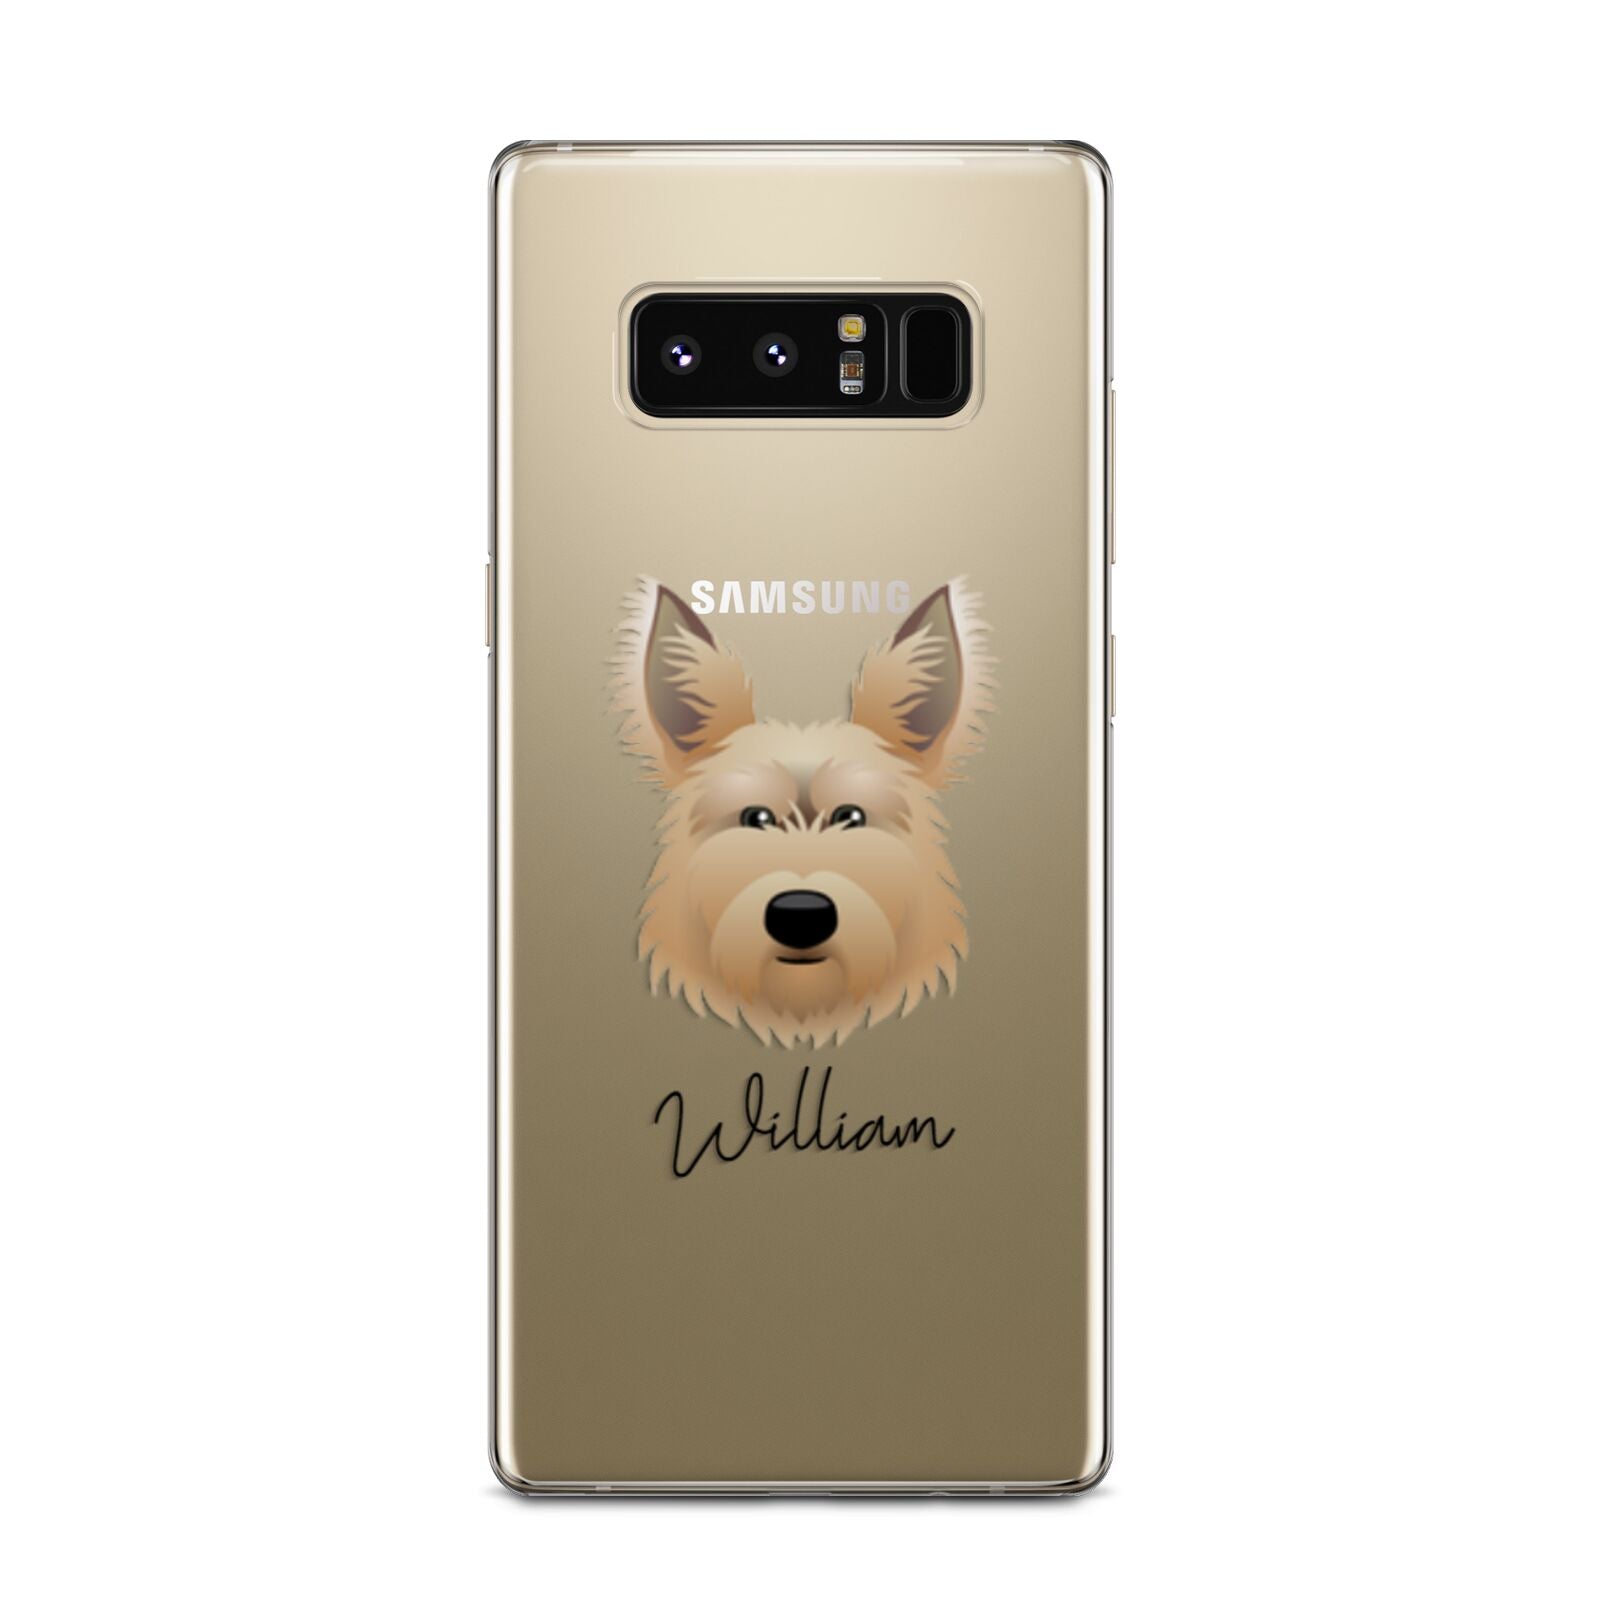 Picardy Sheepdog Personalised Samsung Galaxy Note 8 Case